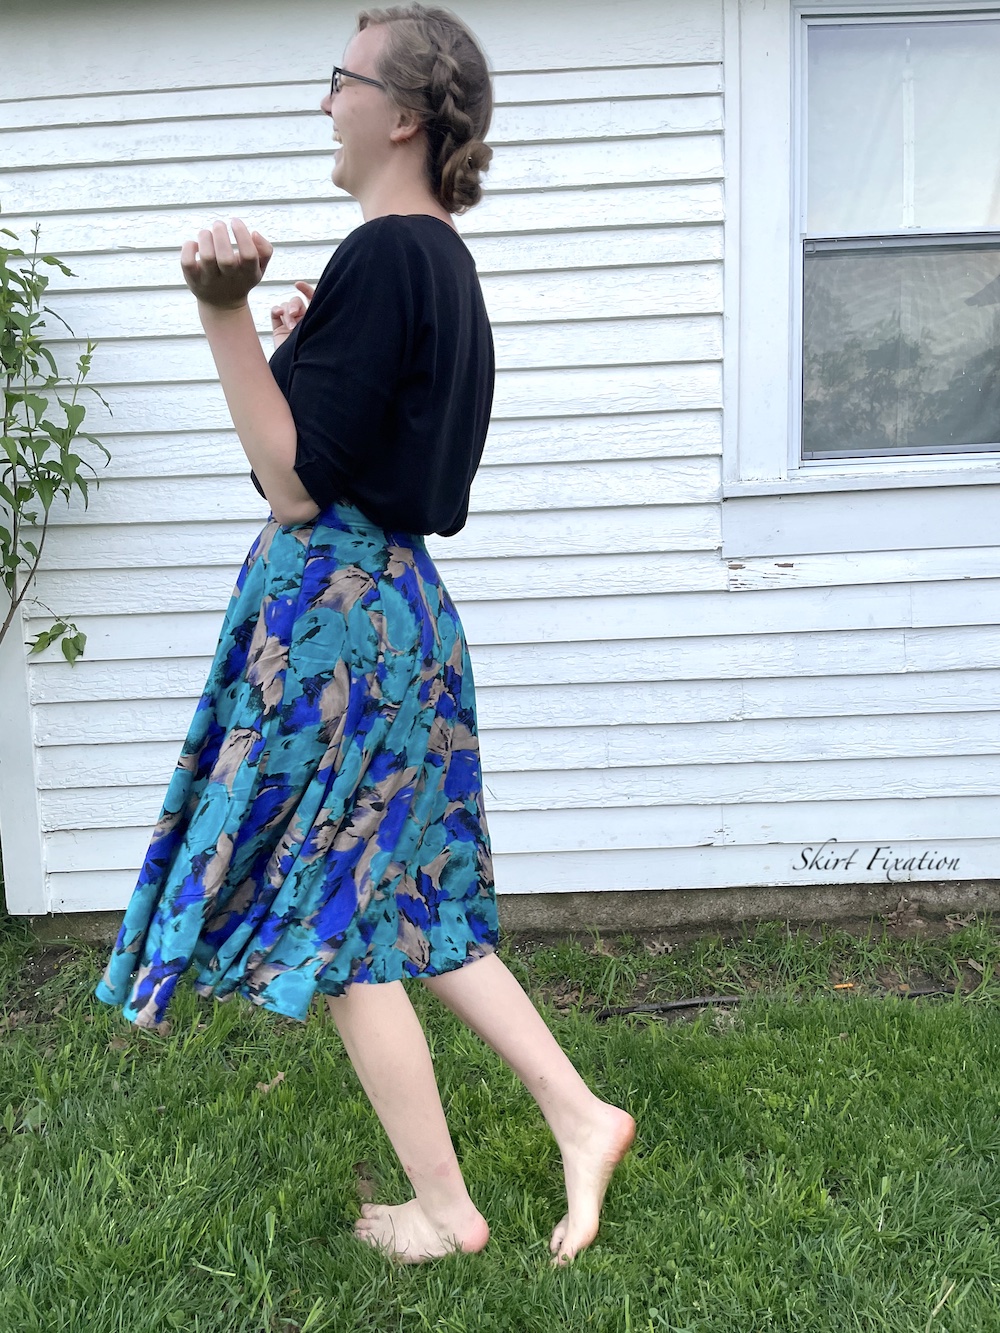 Circle skirt using less fabric: tutorial from Skirt Fixation